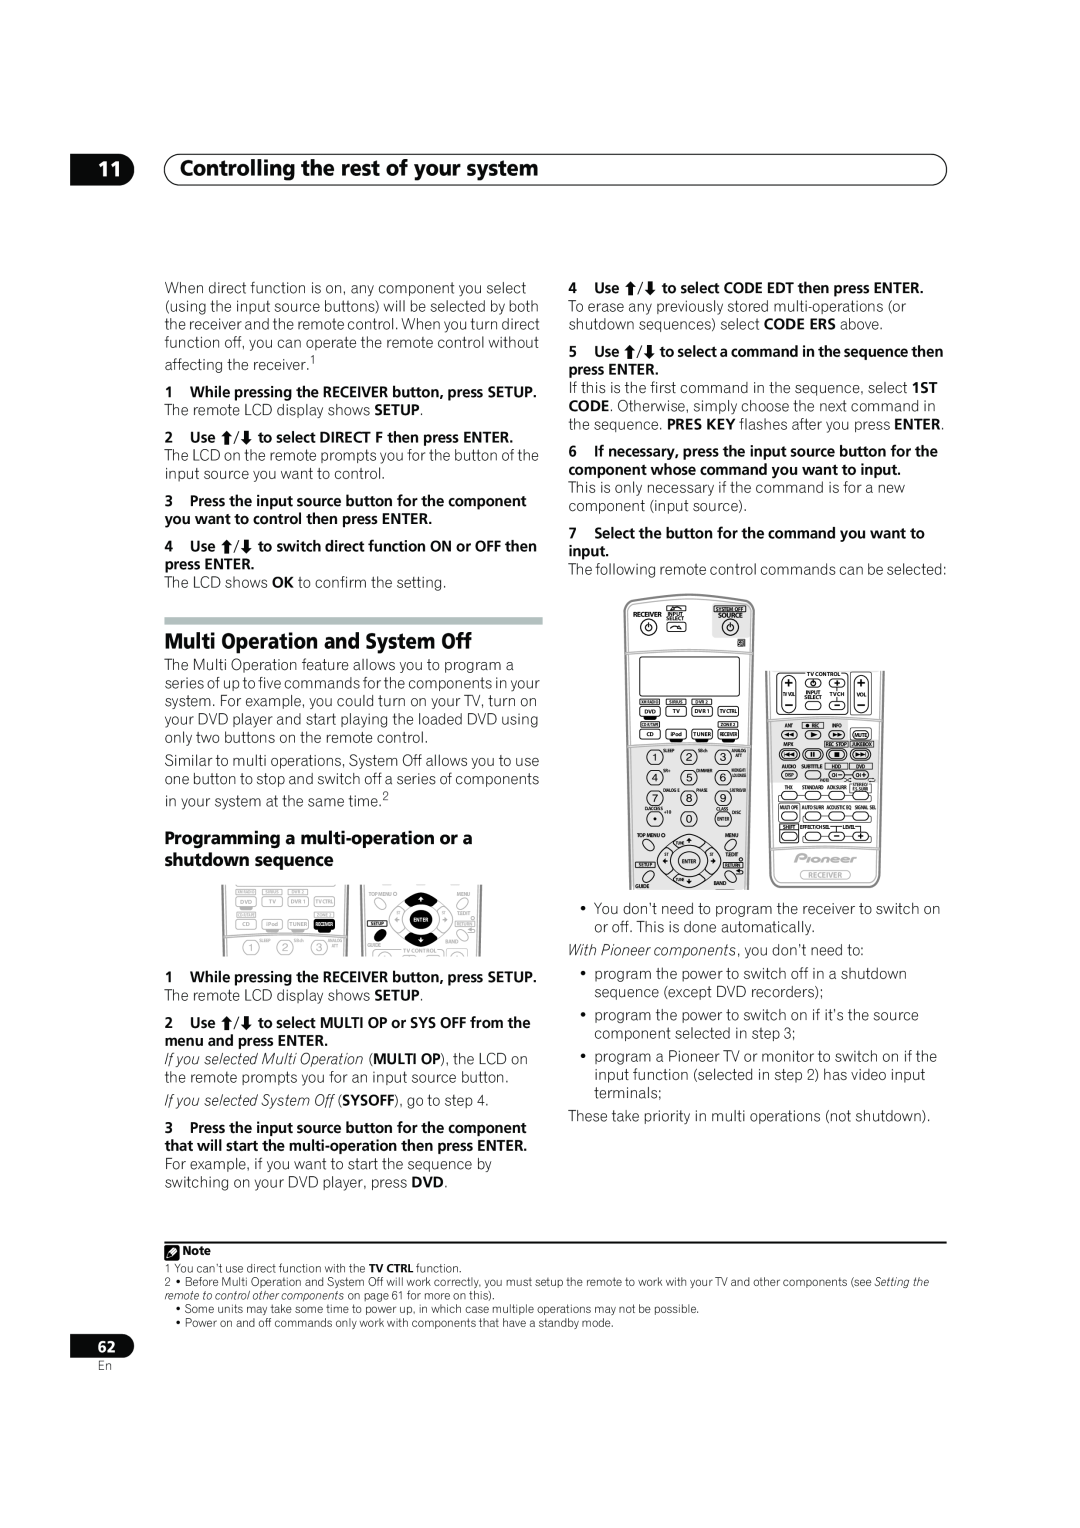 Pioneer VSX-90TXV operating instructions 11Controlling the rest of your system, Multi Operation and System Off 